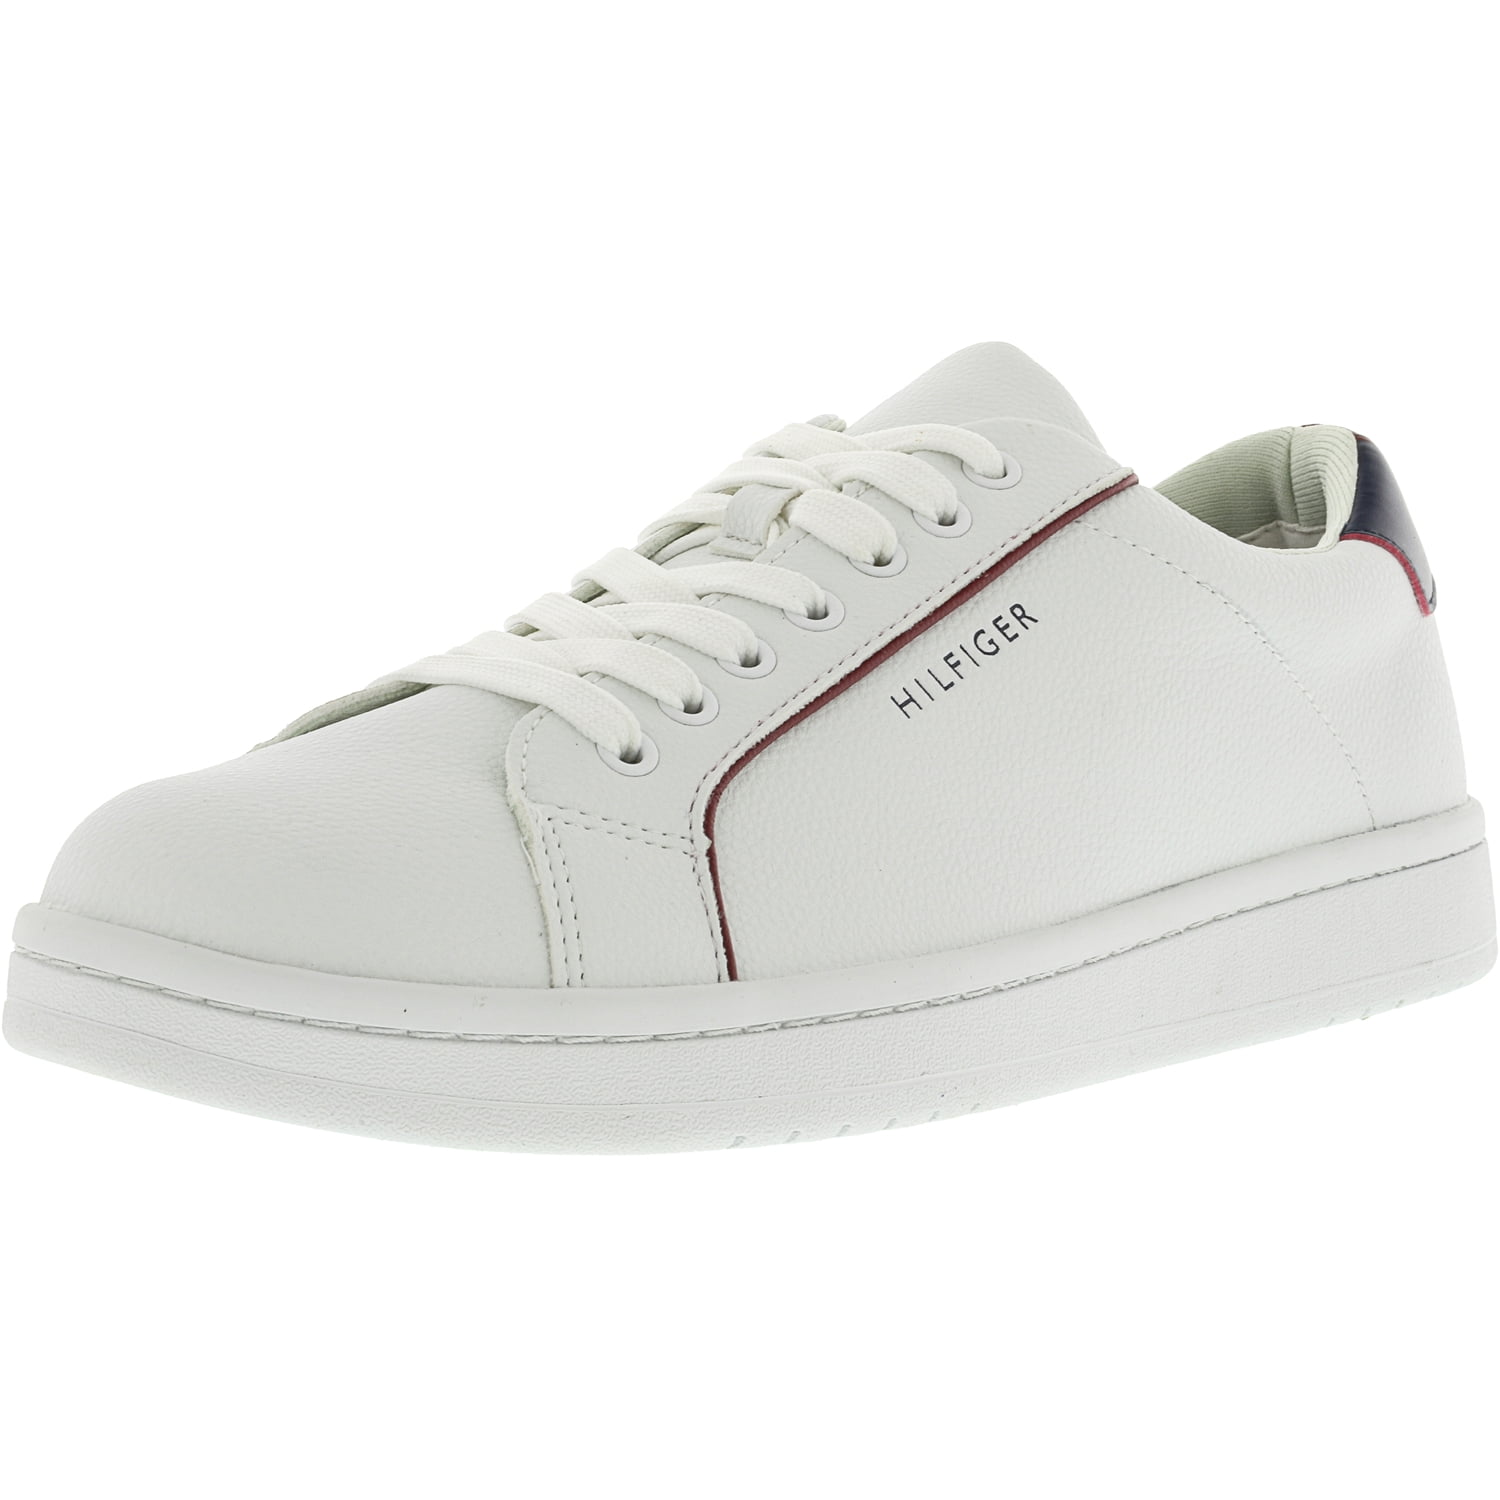 Tommy Hilfiger Men's Louie White Ankle-High Leather Fashion Sneaker ...